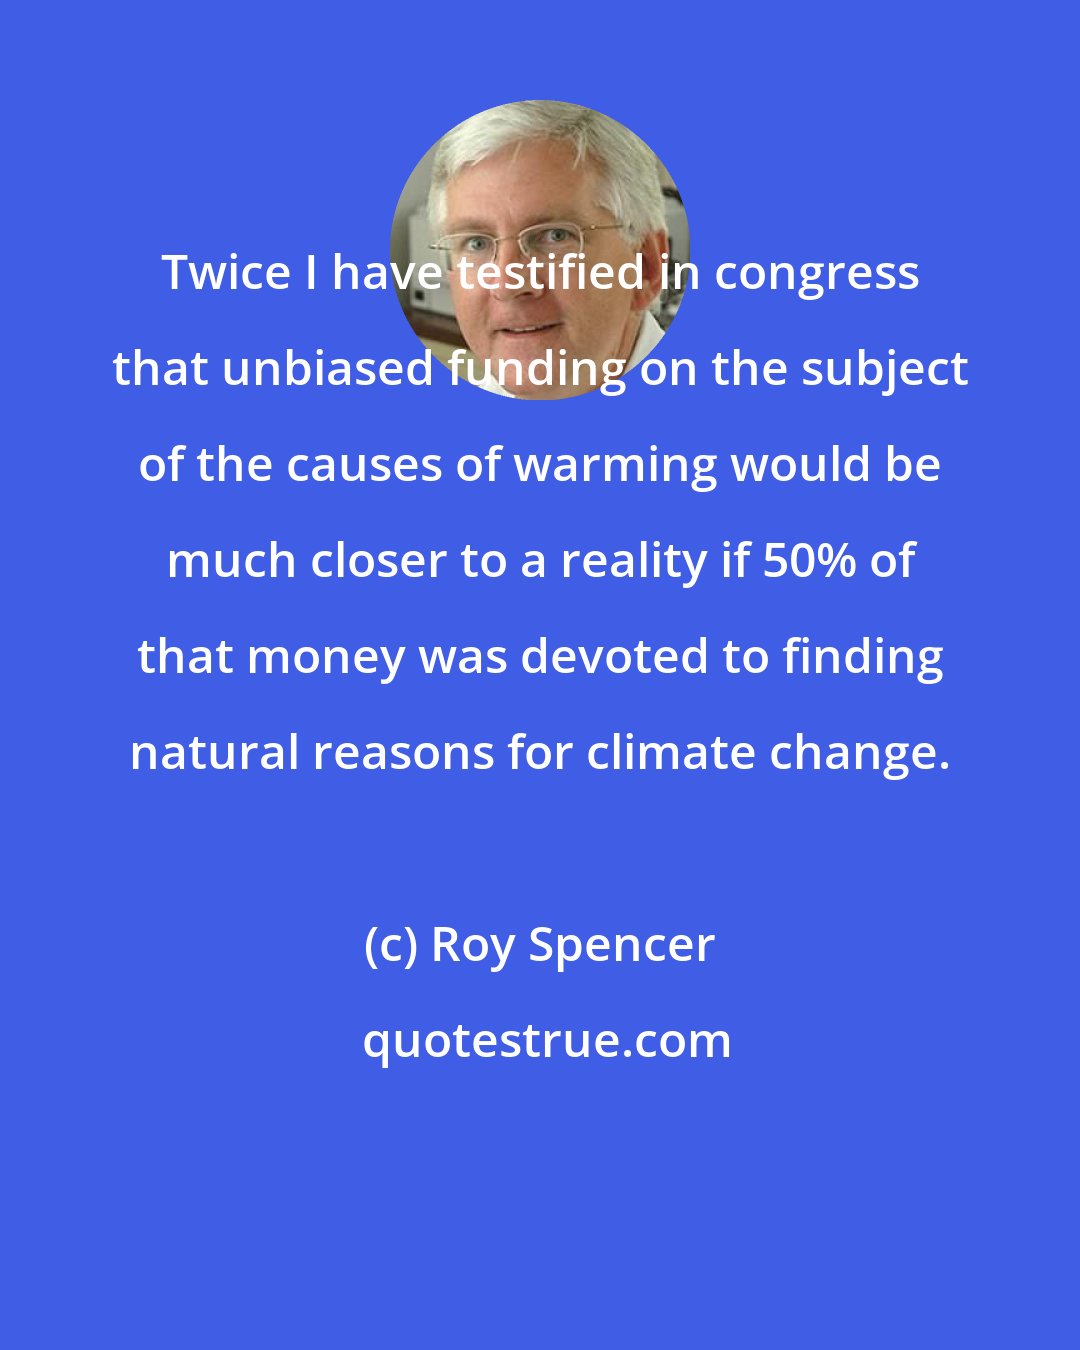 Roy Spencer: Twice I have testified in congress that unbiased funding on the subject of the causes of warming would be much closer to a reality if 50% of that money was devoted to finding natural reasons for climate change.